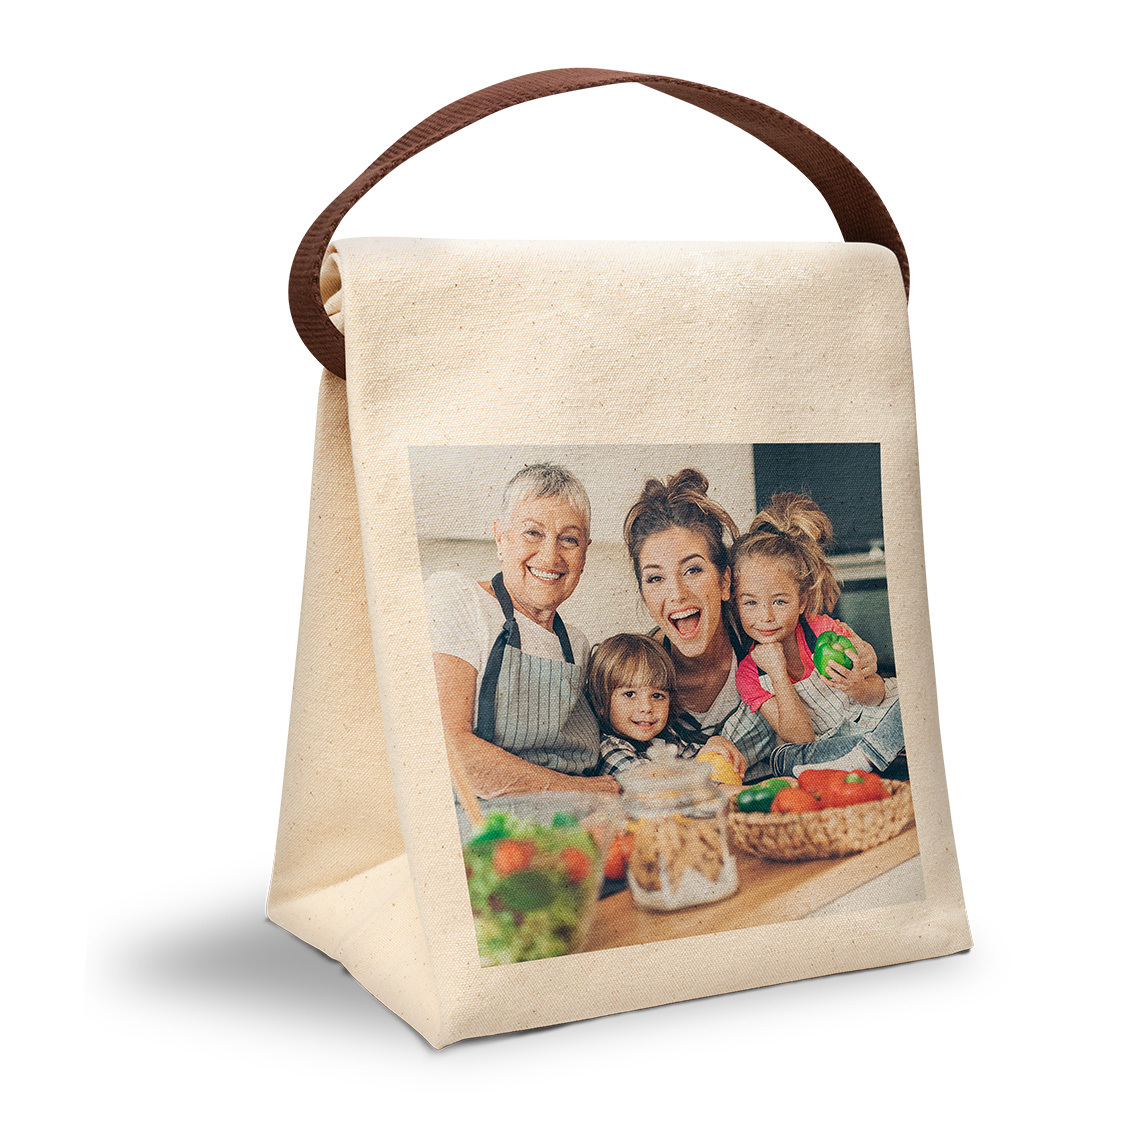 Personalized Lunch Bags | Design Your Own Photo Lunch Bag